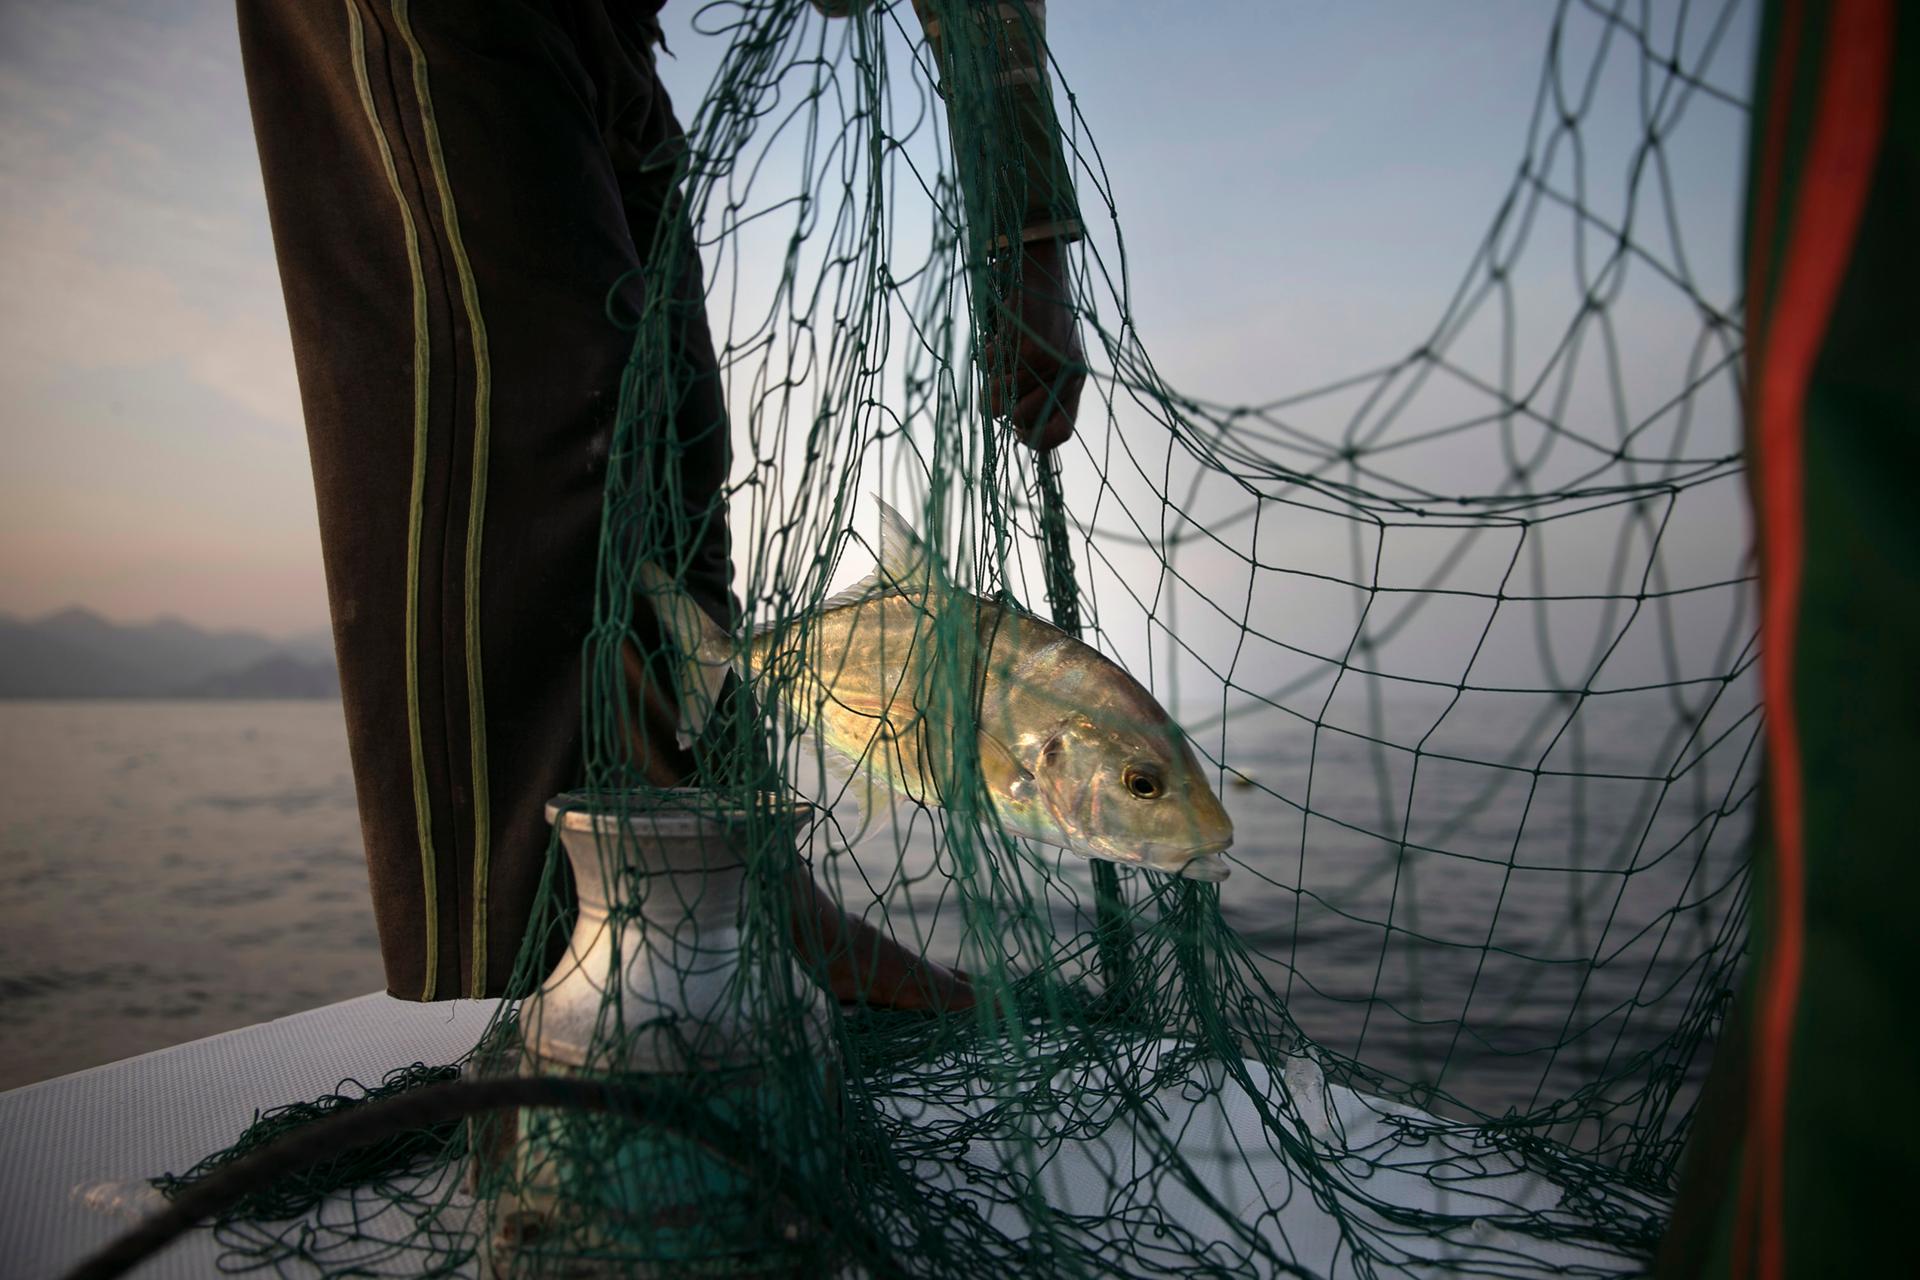 Some 85% of key fish species in Arabian Gulf wiped out, UAE study finds